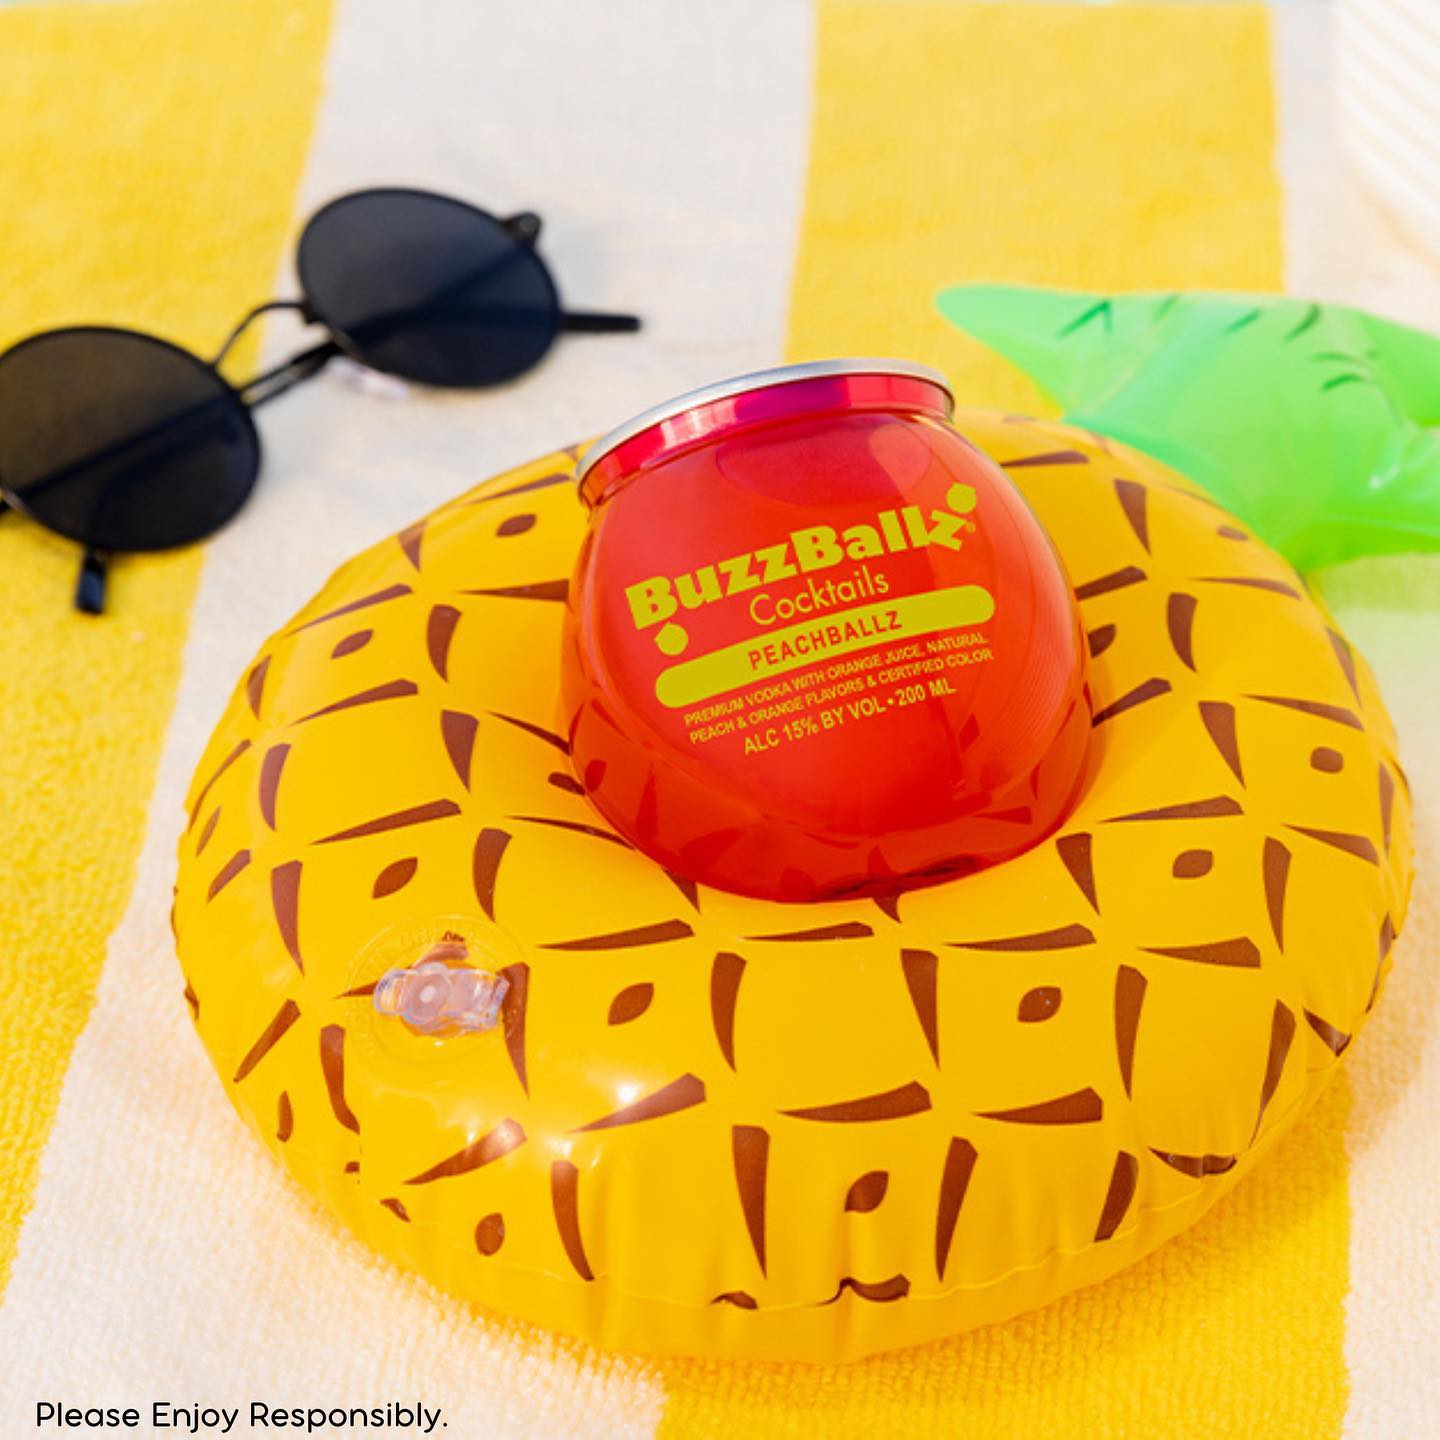 T-minus 30 more days until summer ends  Luckily, there’s still time to cram in some summer mems with good friends and BuzzBallz.